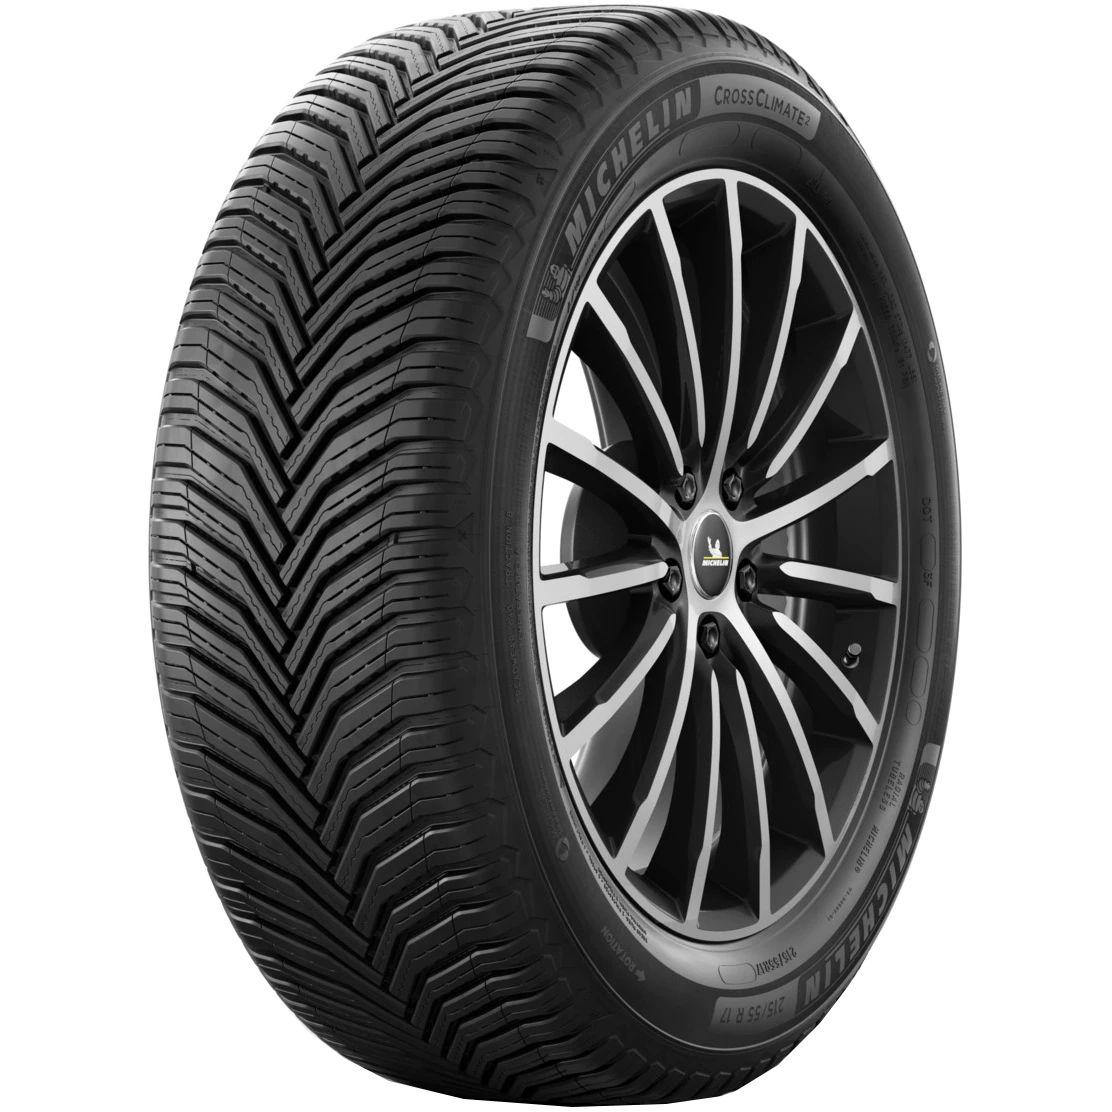 Anvelope all seasons MICHELIN CrossClimate2 M+S 205/55 R16 91H